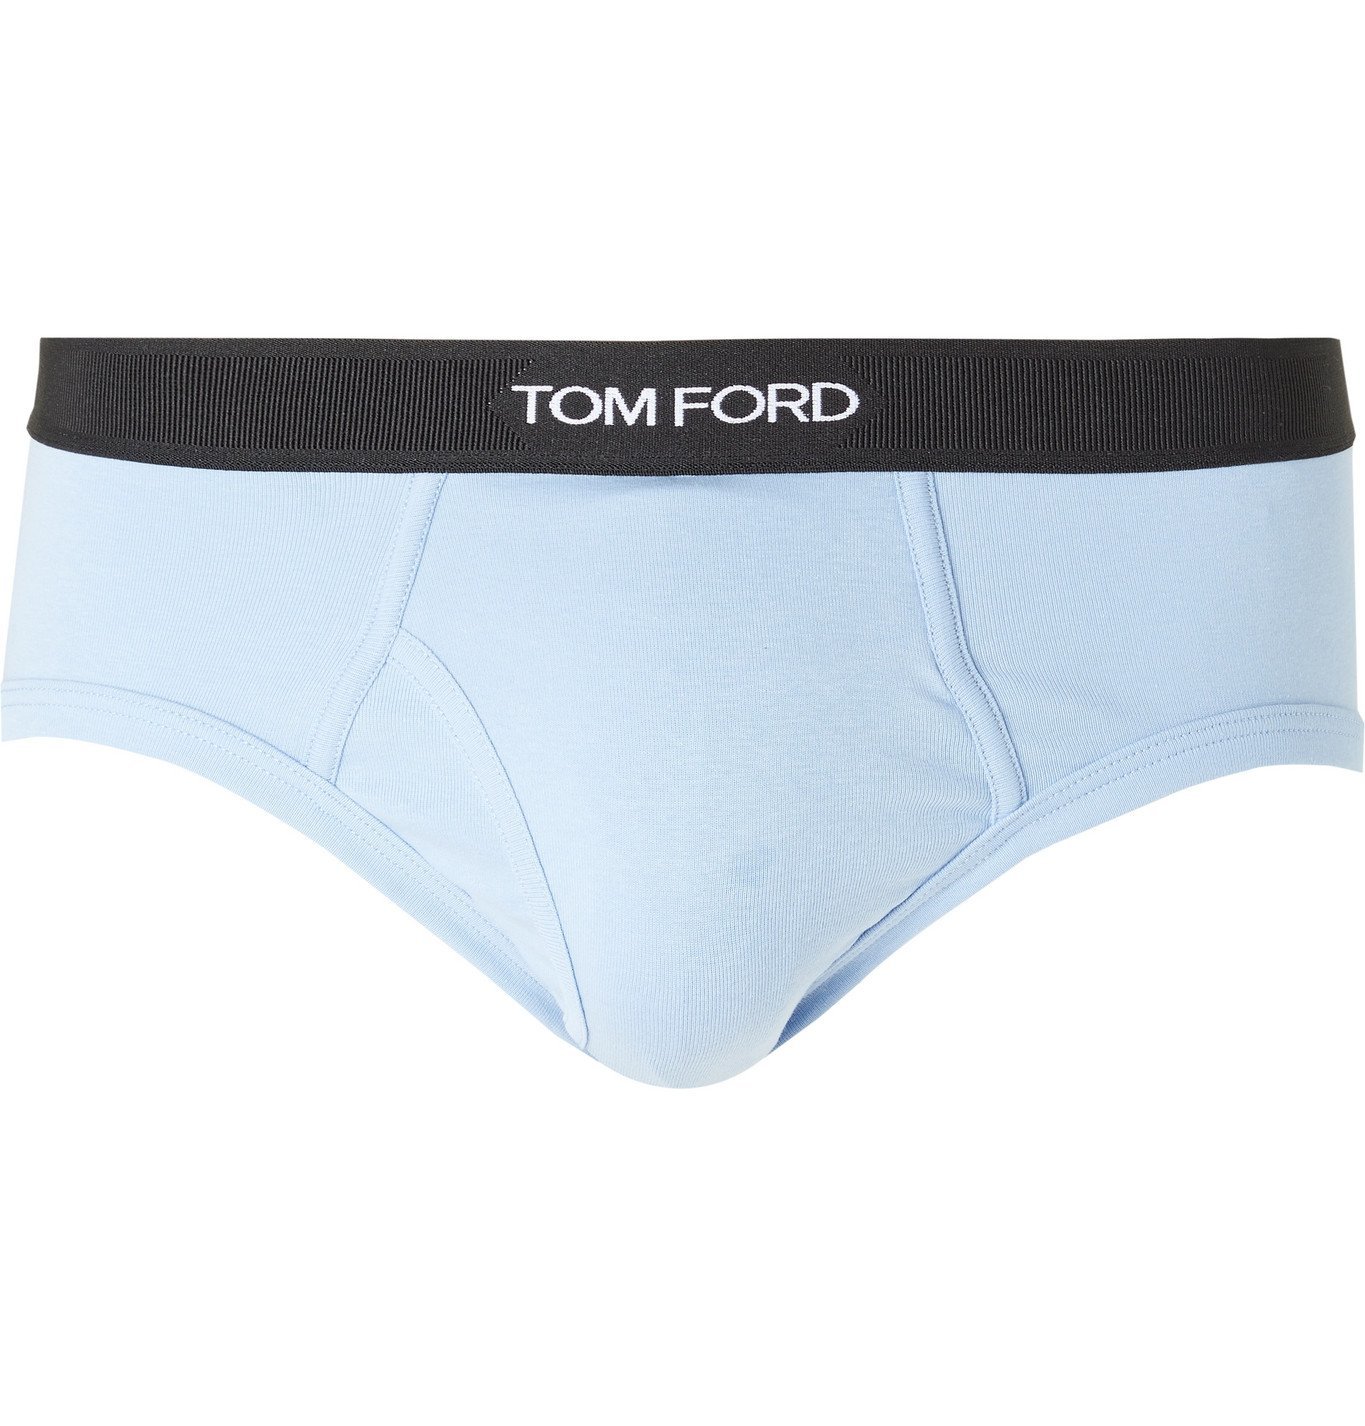 TOM FORD - Stretch-Cotton Jersey Briefs - Blue TOM FORD